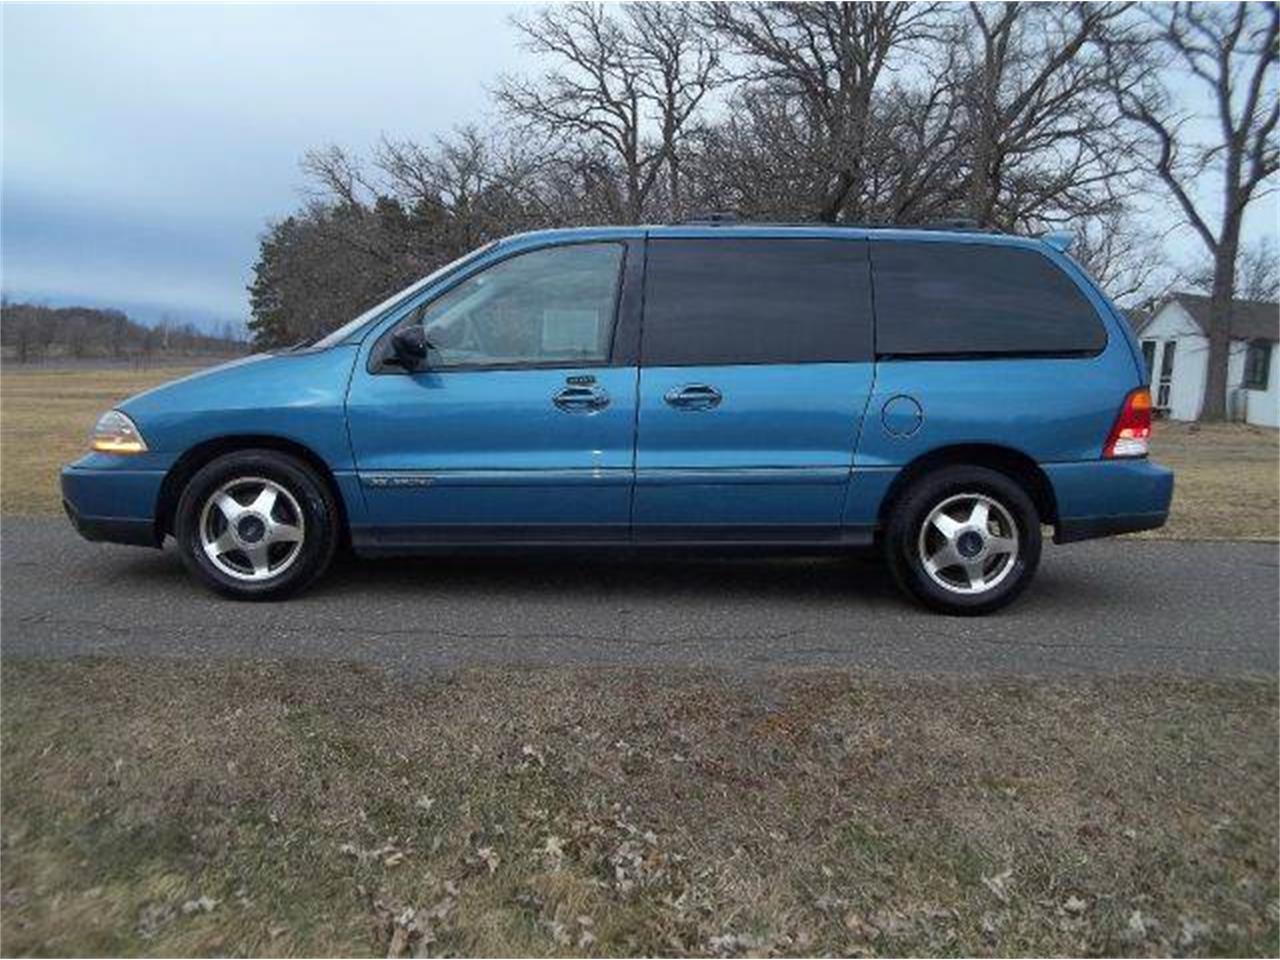 2001 Ford Windstar for Sale | ClassicCars.com | CC-657626